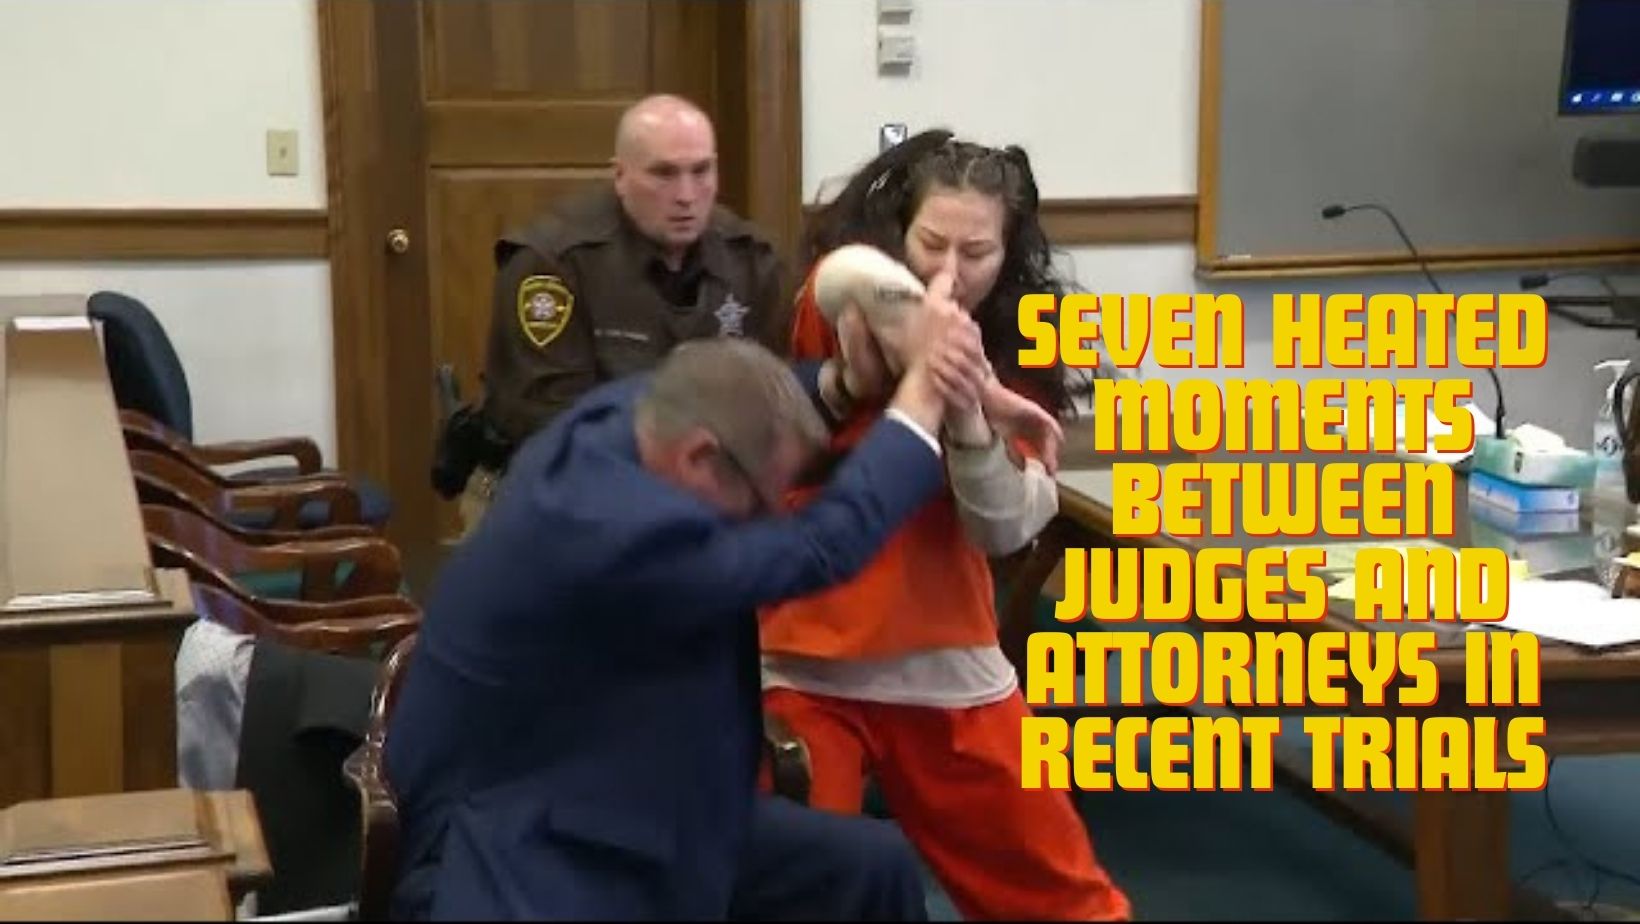 Seven Heated Moments Between Judges and Attorneys in Recent Trials